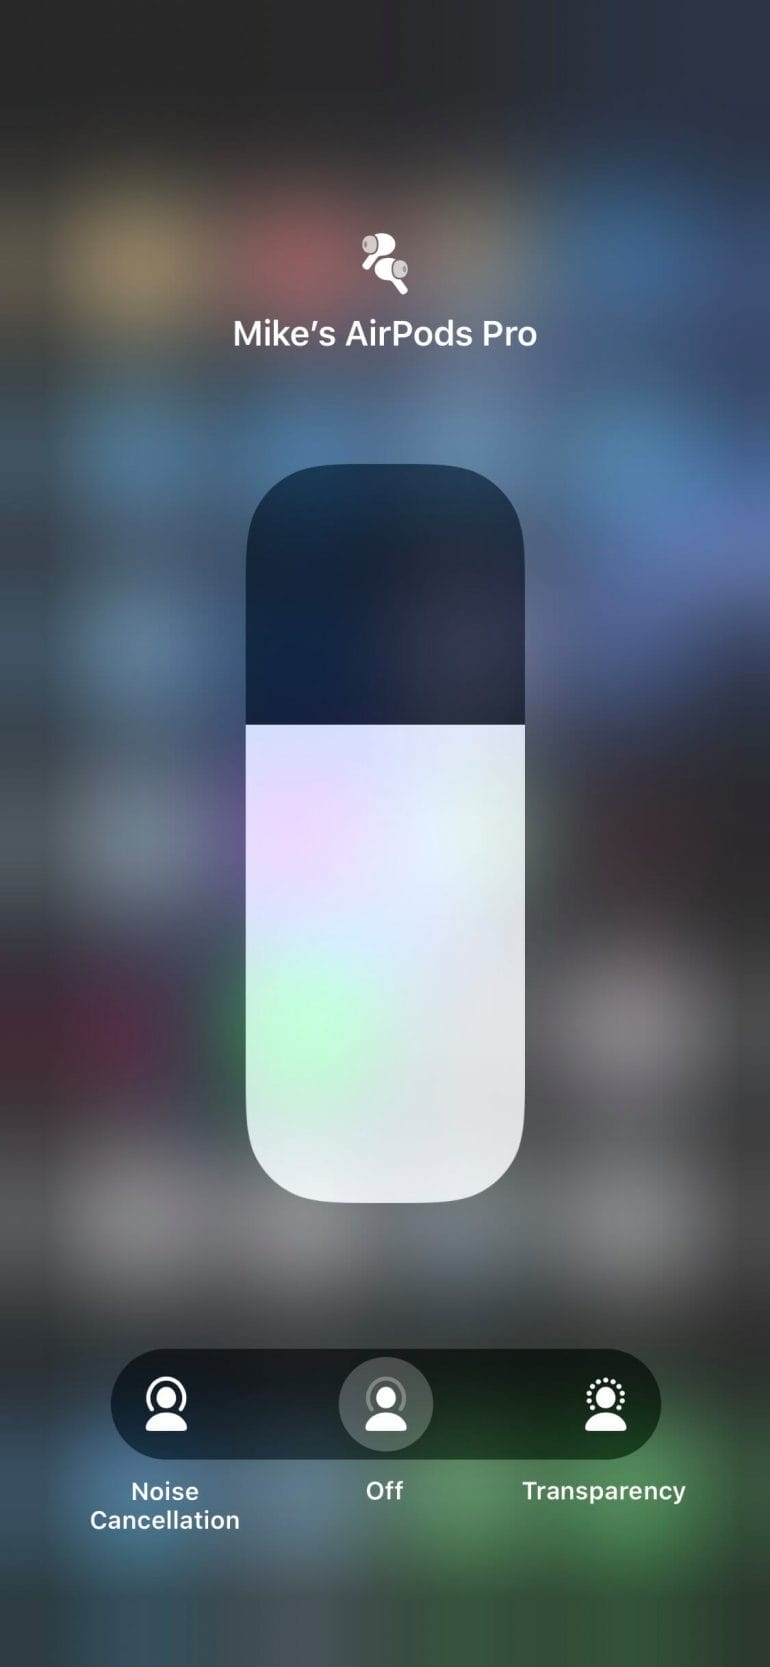 Switch between noise cancellation and transparency mode via Control Center